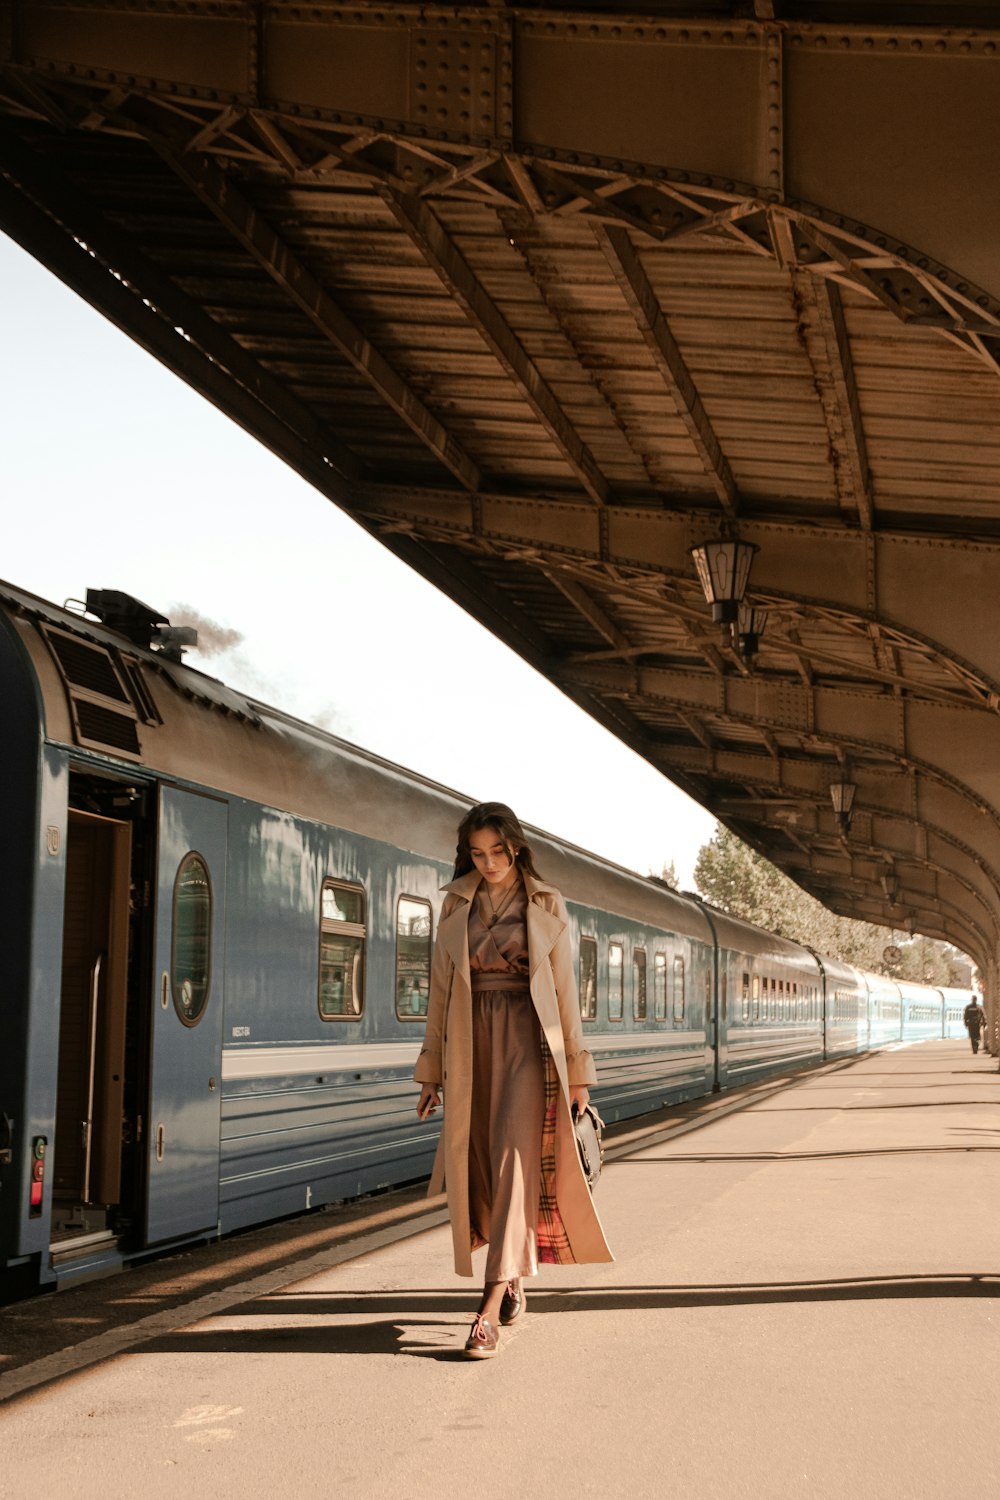 a woman in a trench coat is walking towards a train